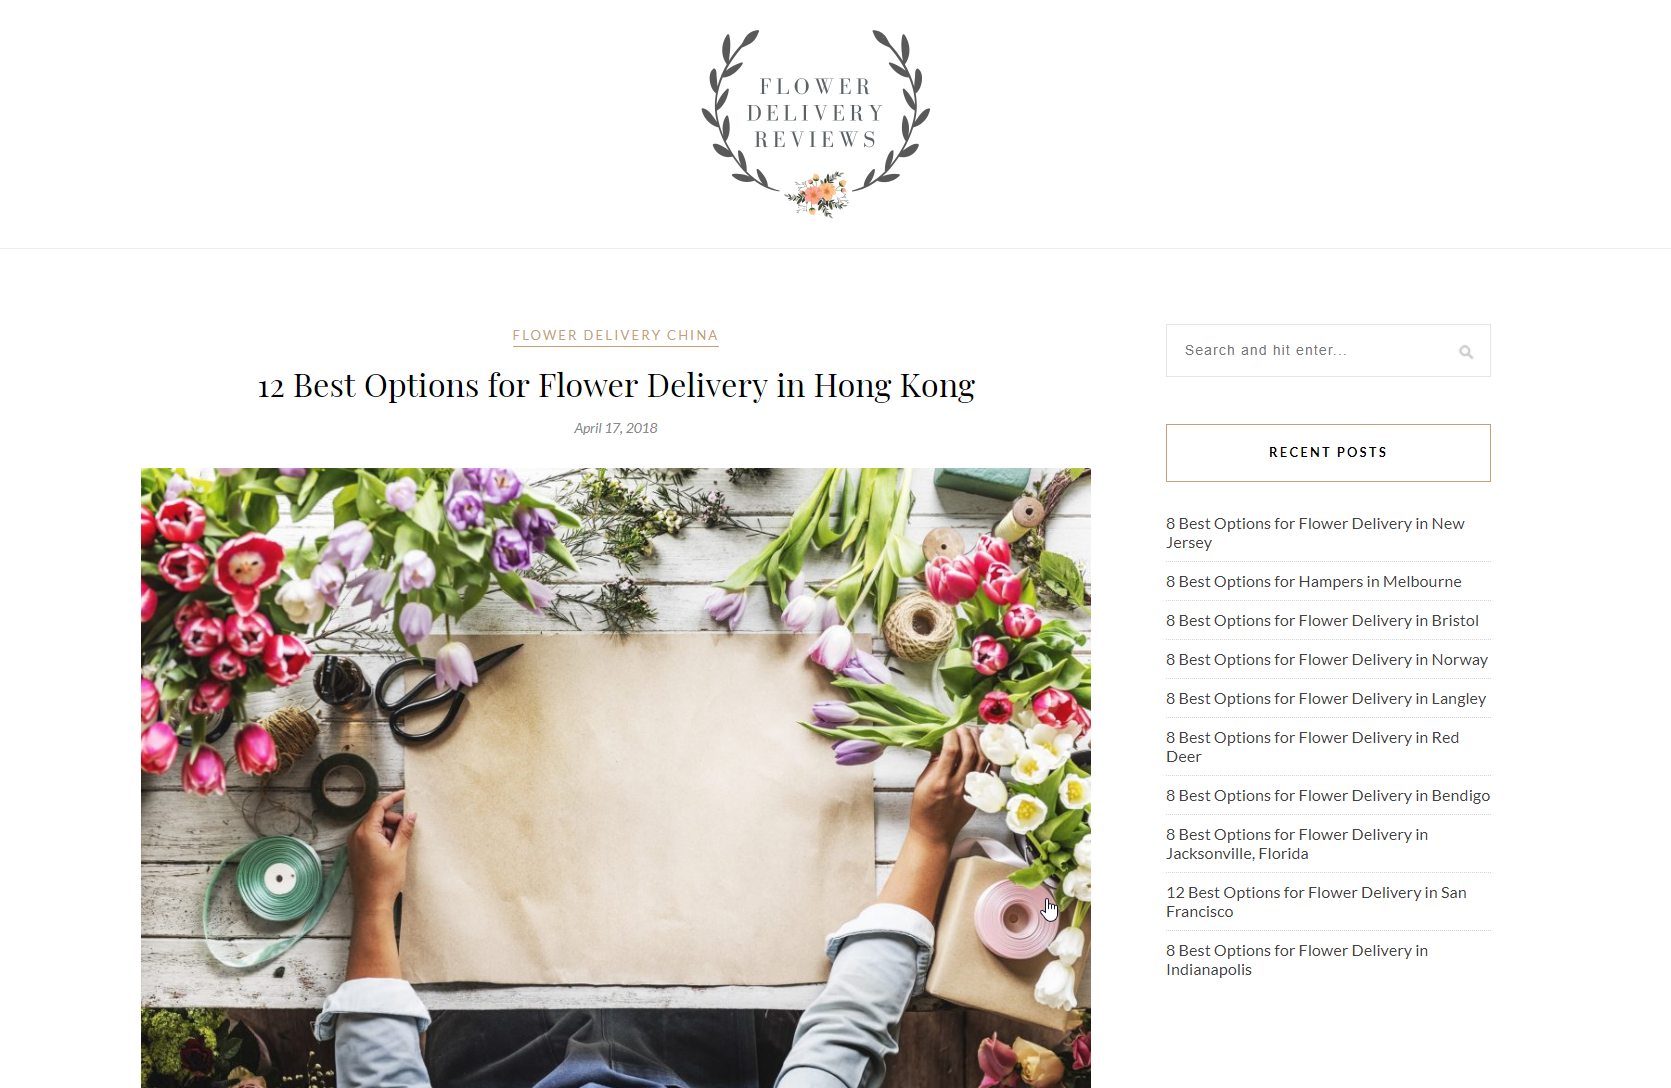 Flower Delivery Review Listing